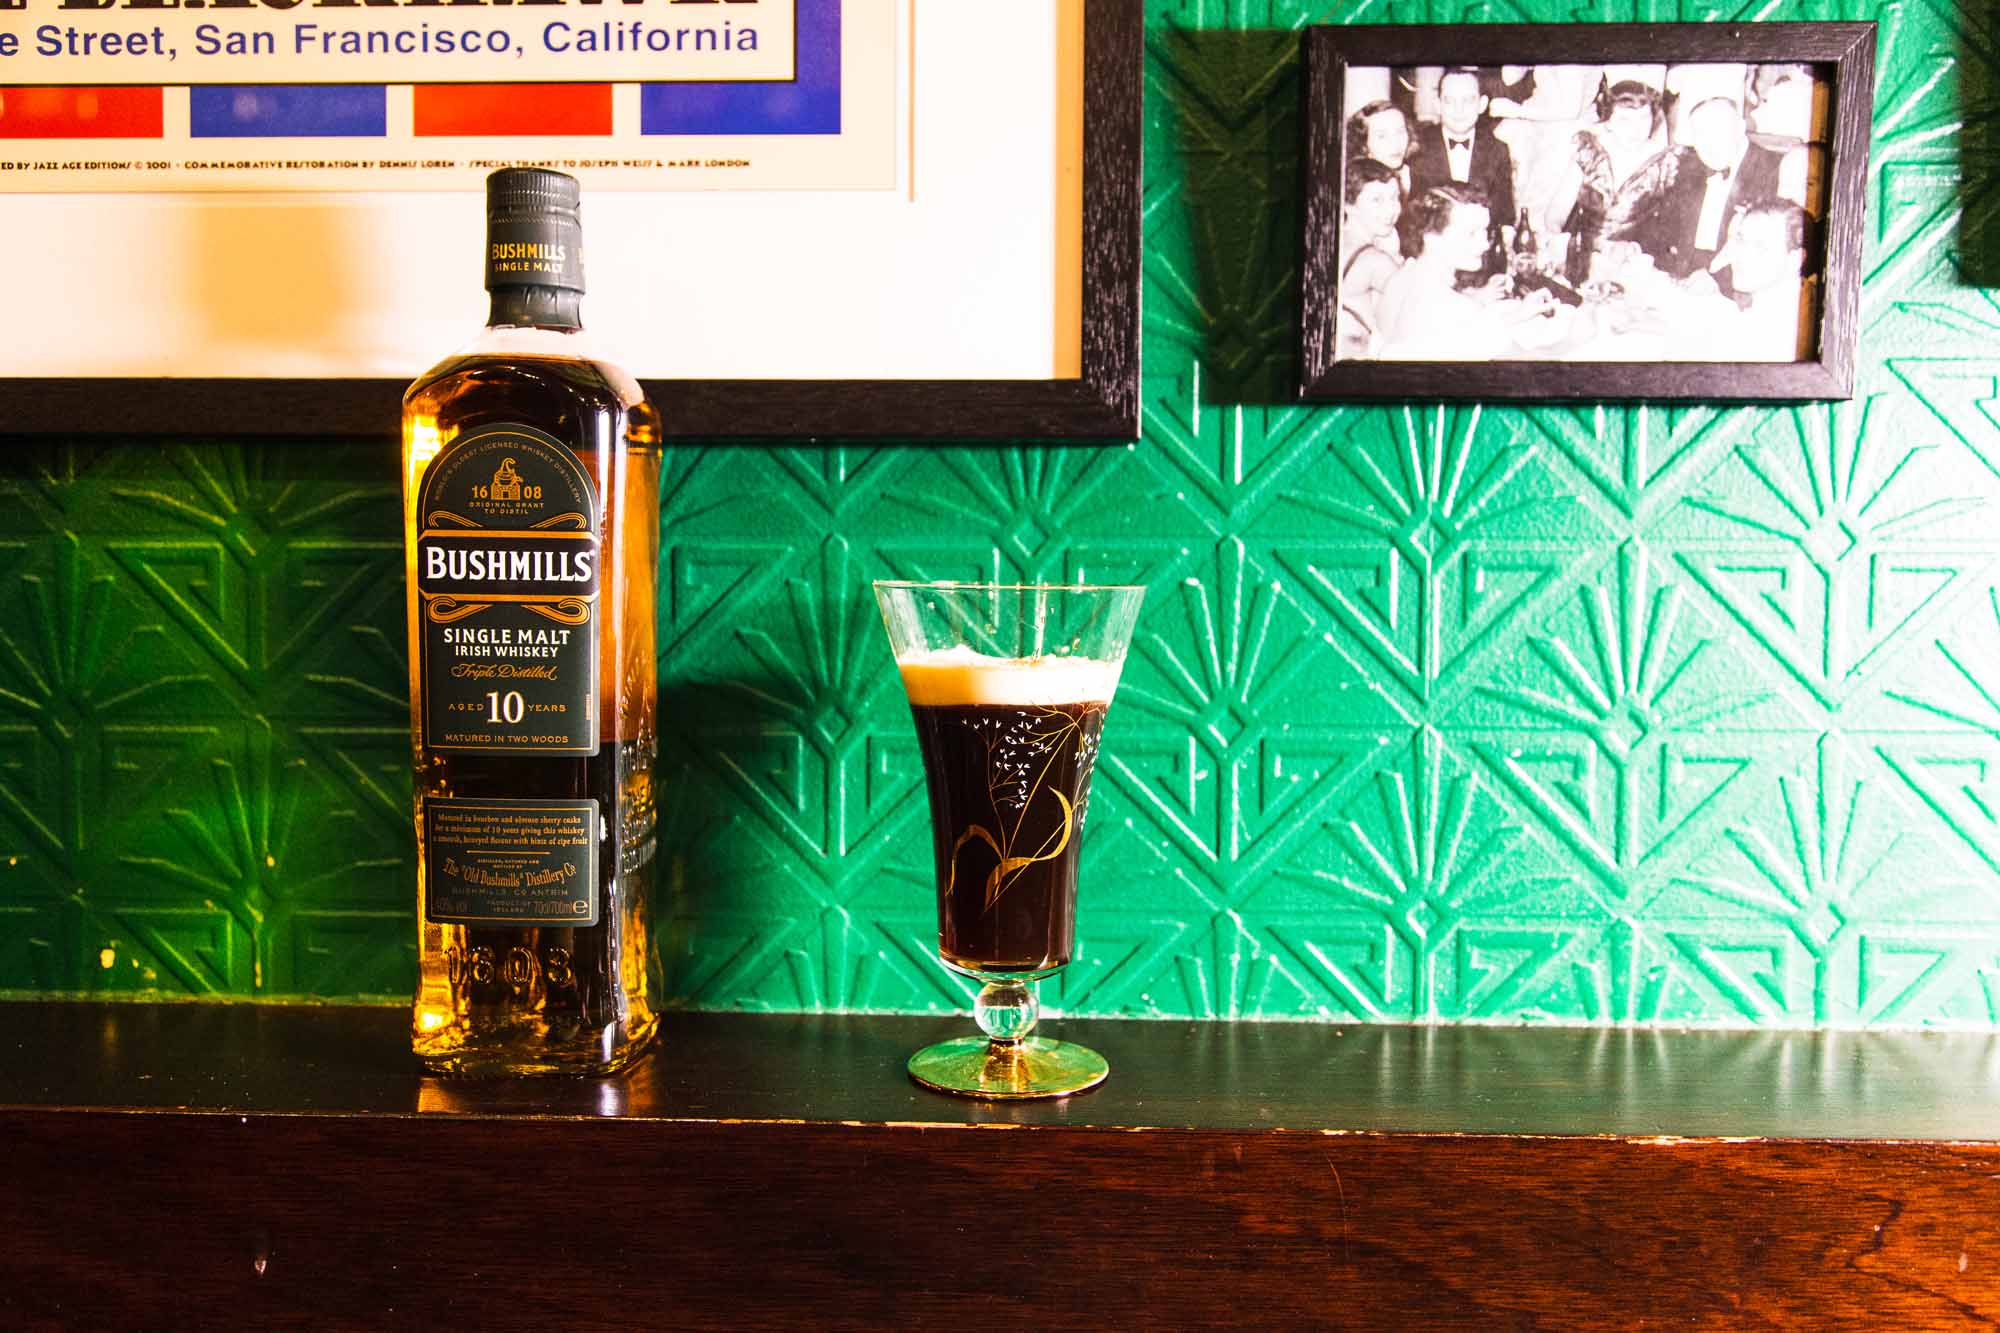 This is the best Irish Coffee recipe we've tried